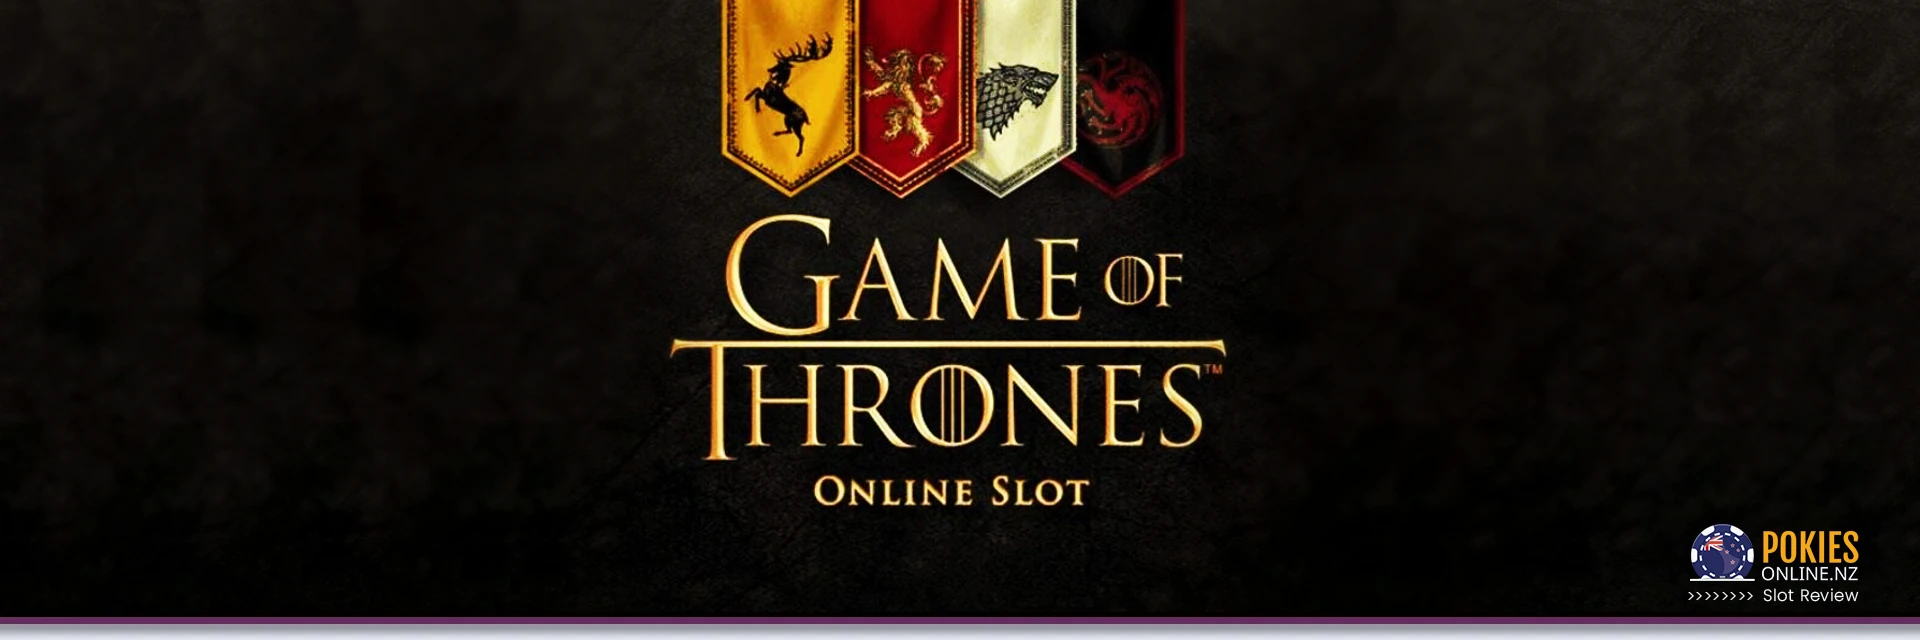 Game of thrones slot Banner